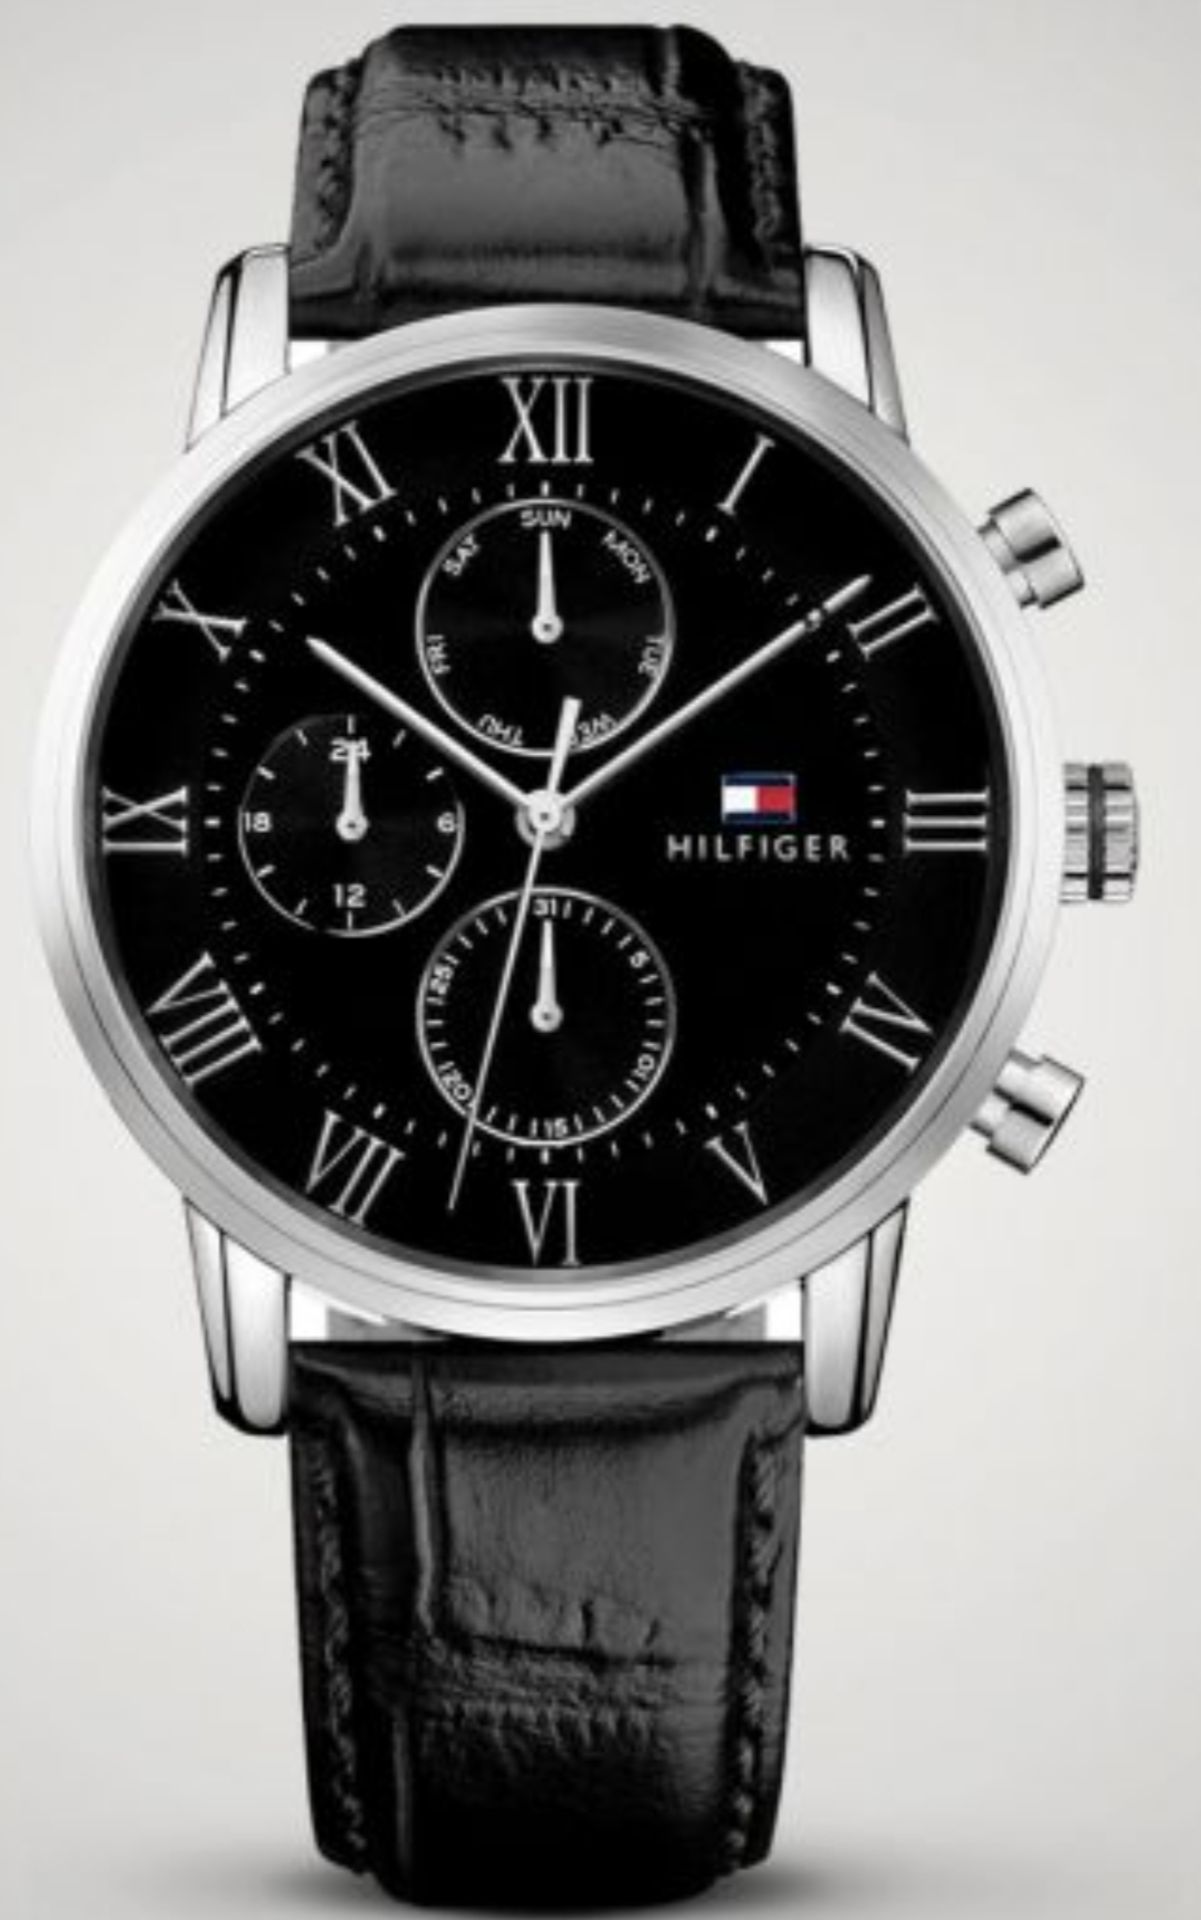 Tommy Hilfiger 1791401 Kane Chronograph Leather Watch In Black - Image 5 of 6